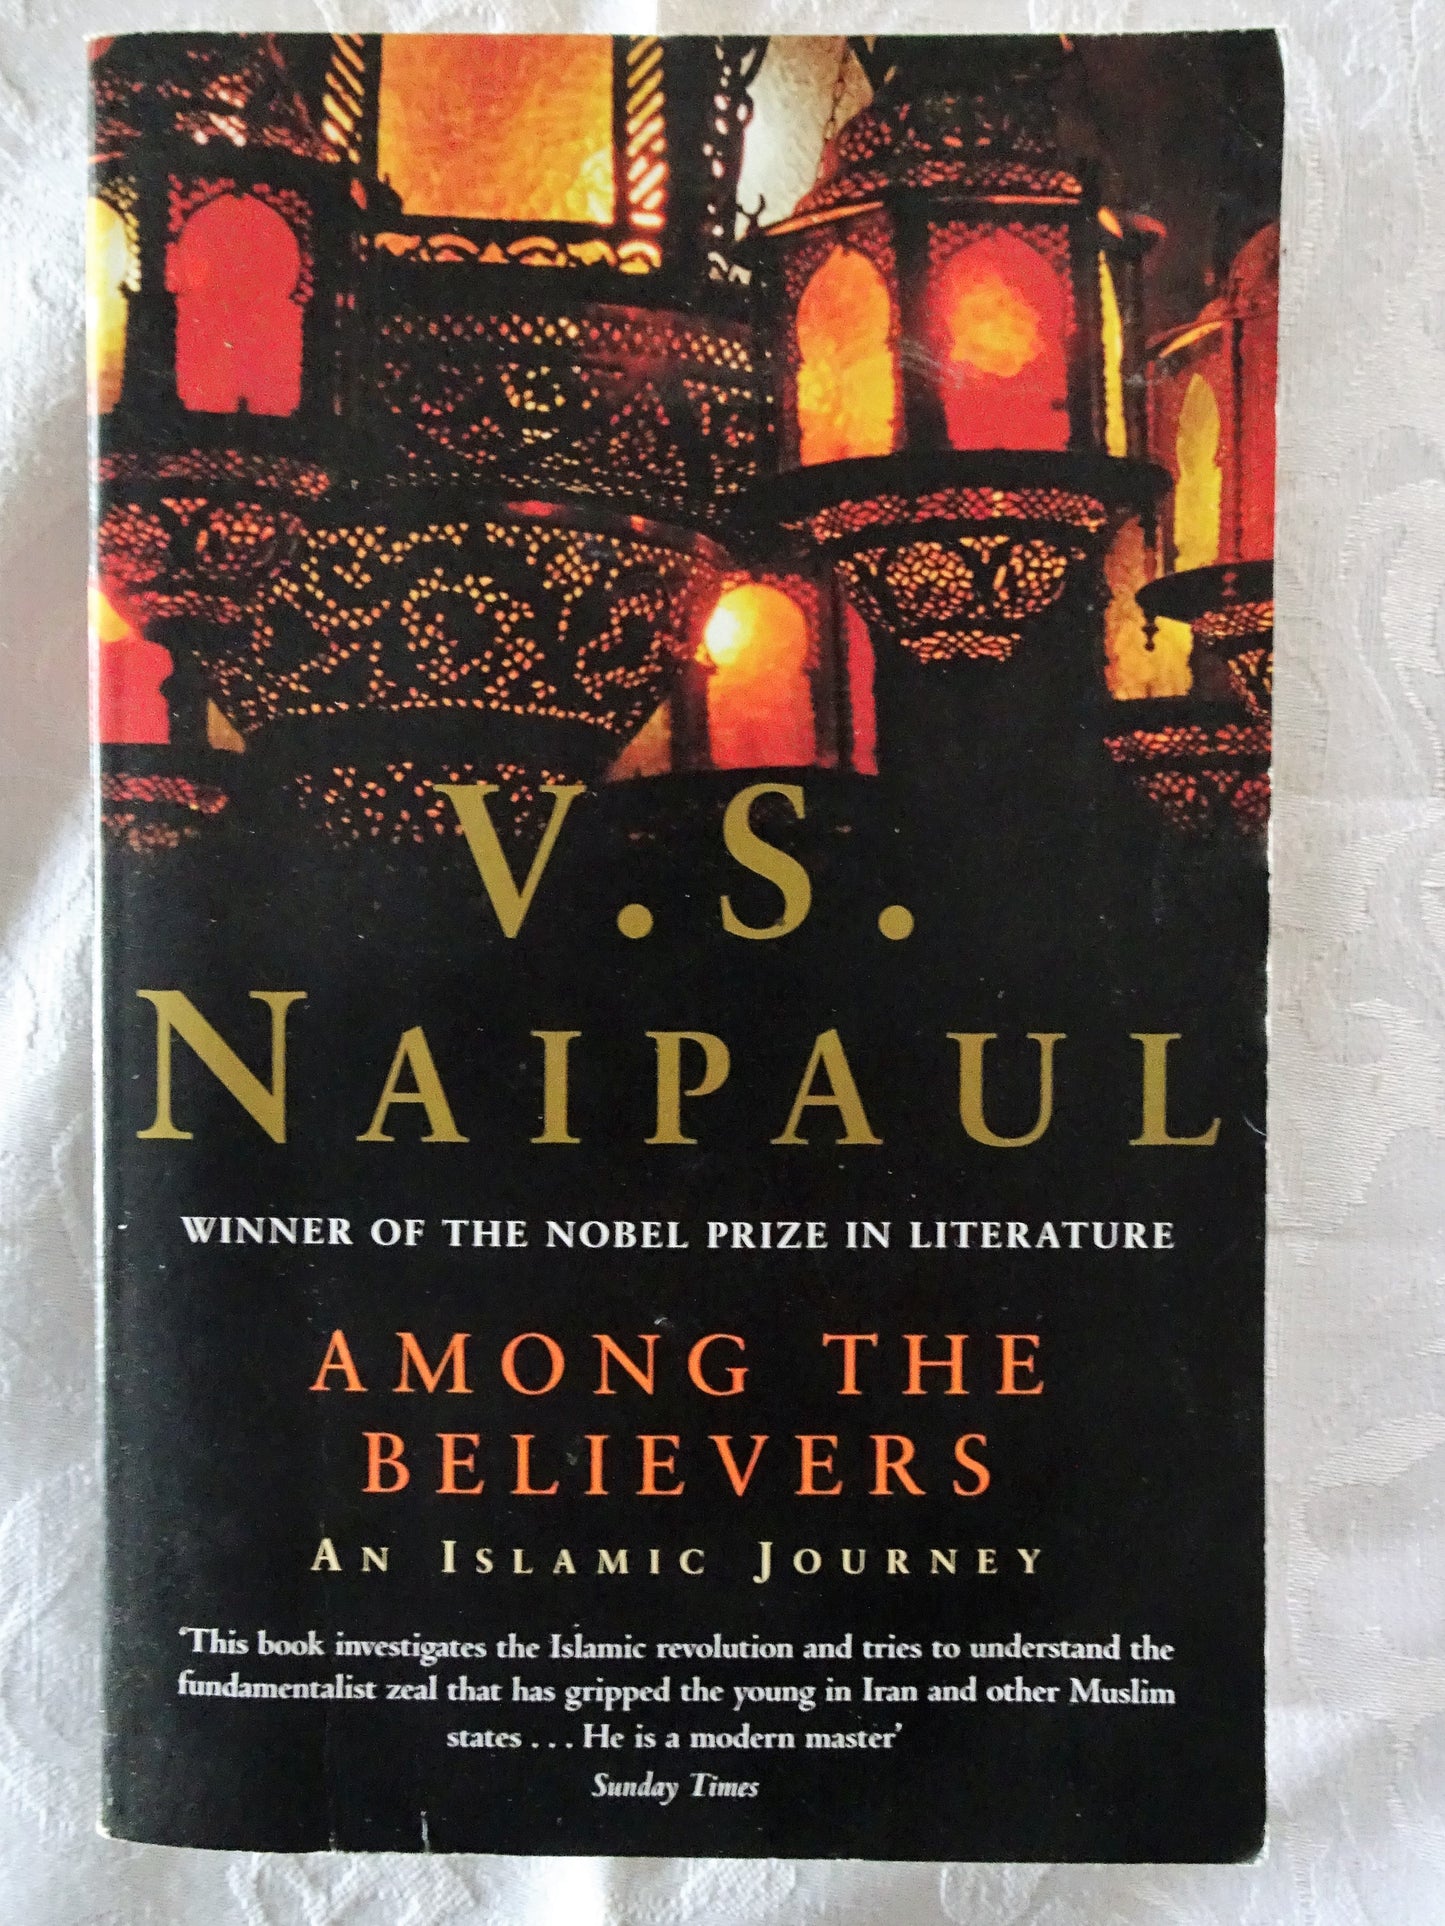 Among The Believers by V. S. Naipaul